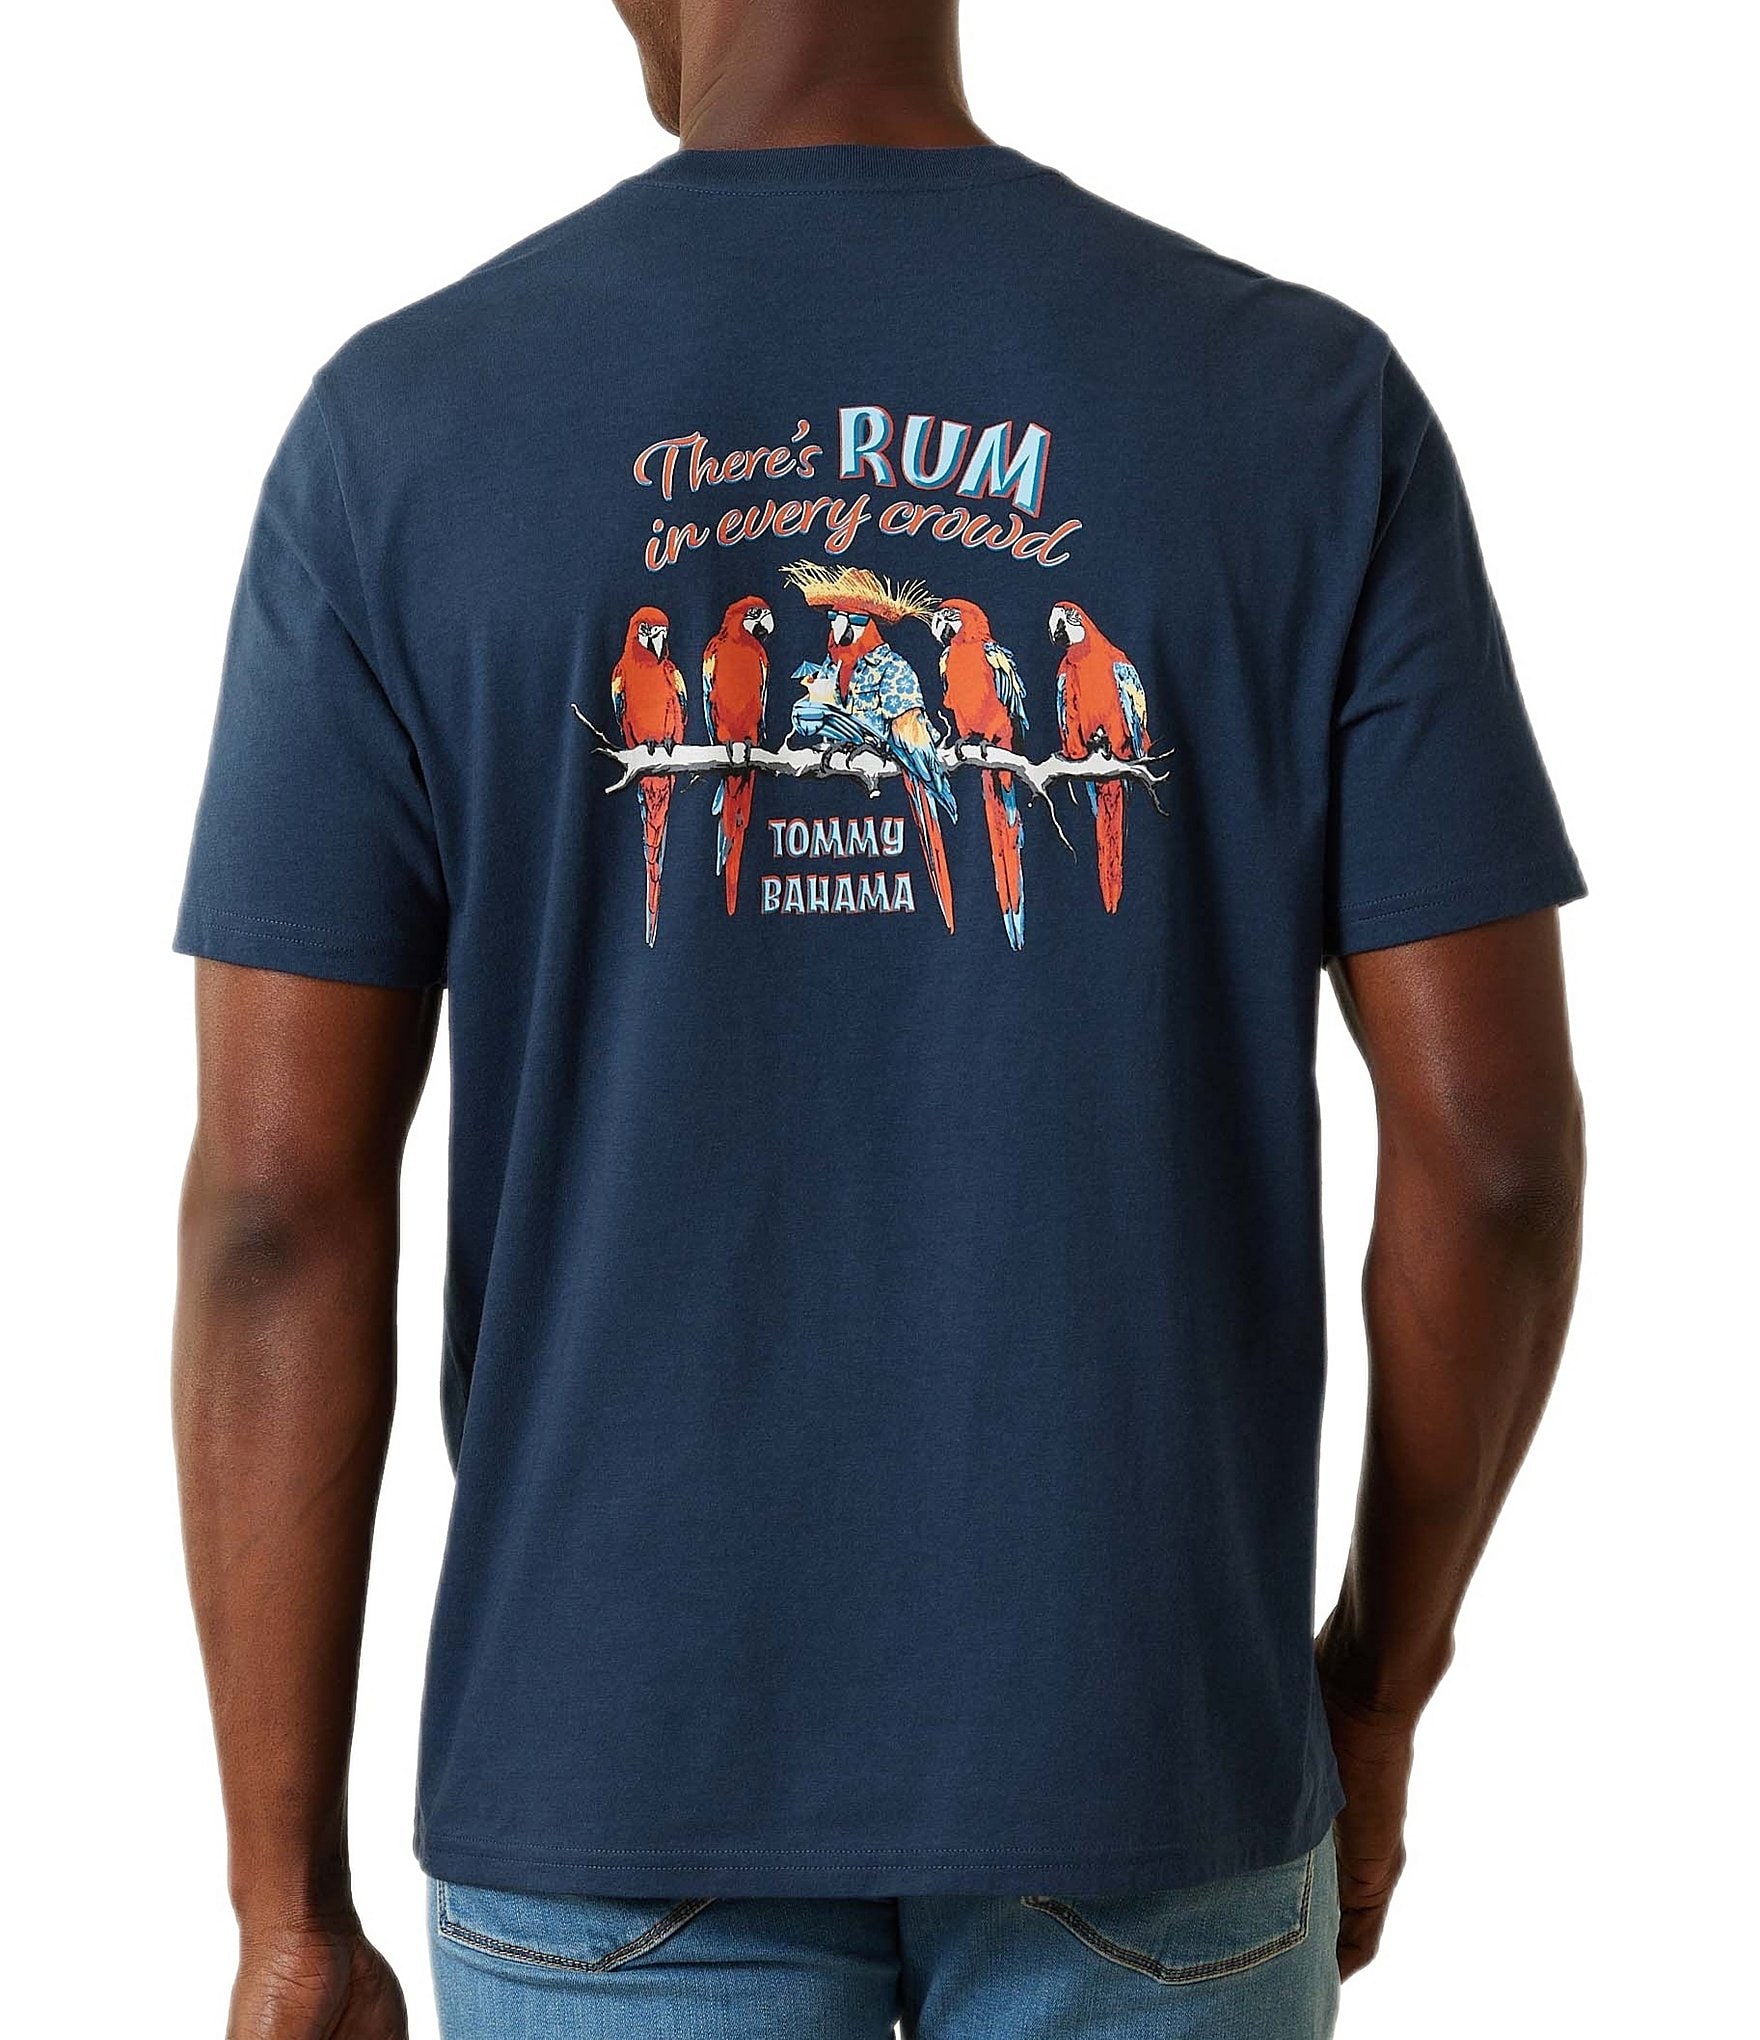 Tommy Bahama Men's Rum in Every Crowd Graphic T-Shirt - Milky Blue - Size XL